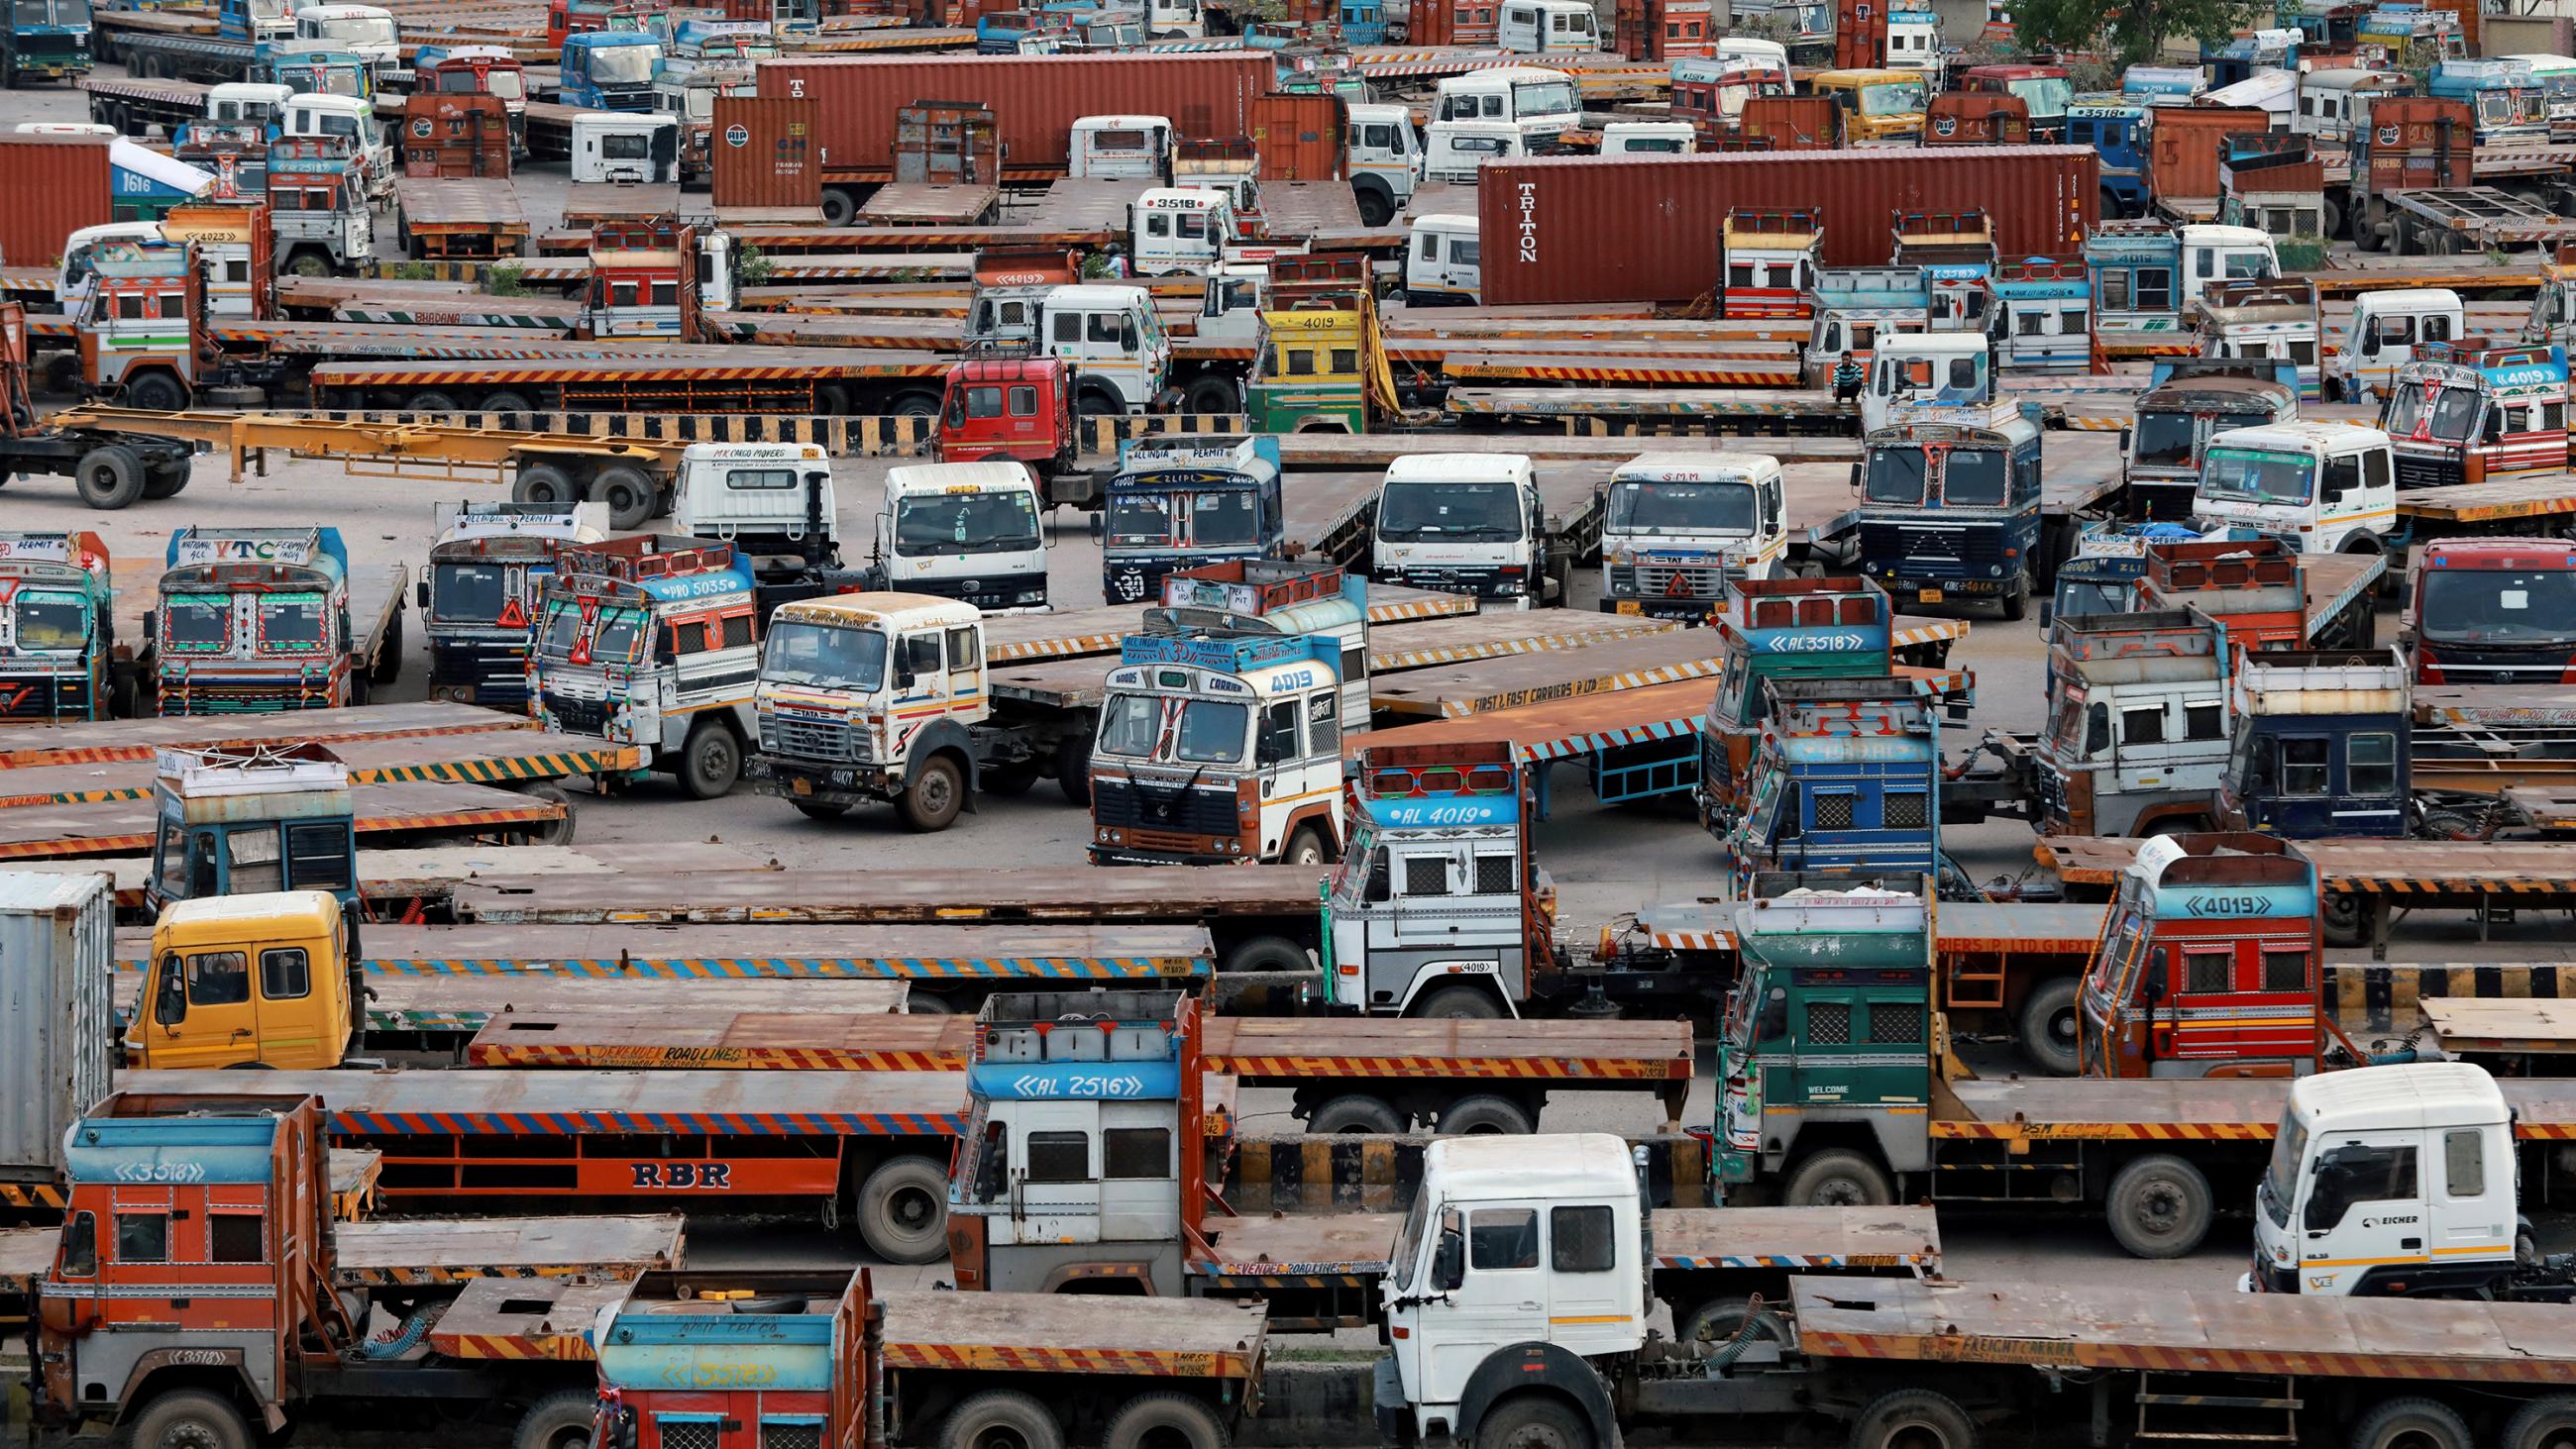 The photo shows a huge collection of large haul trucks packed together in a large parking area. 